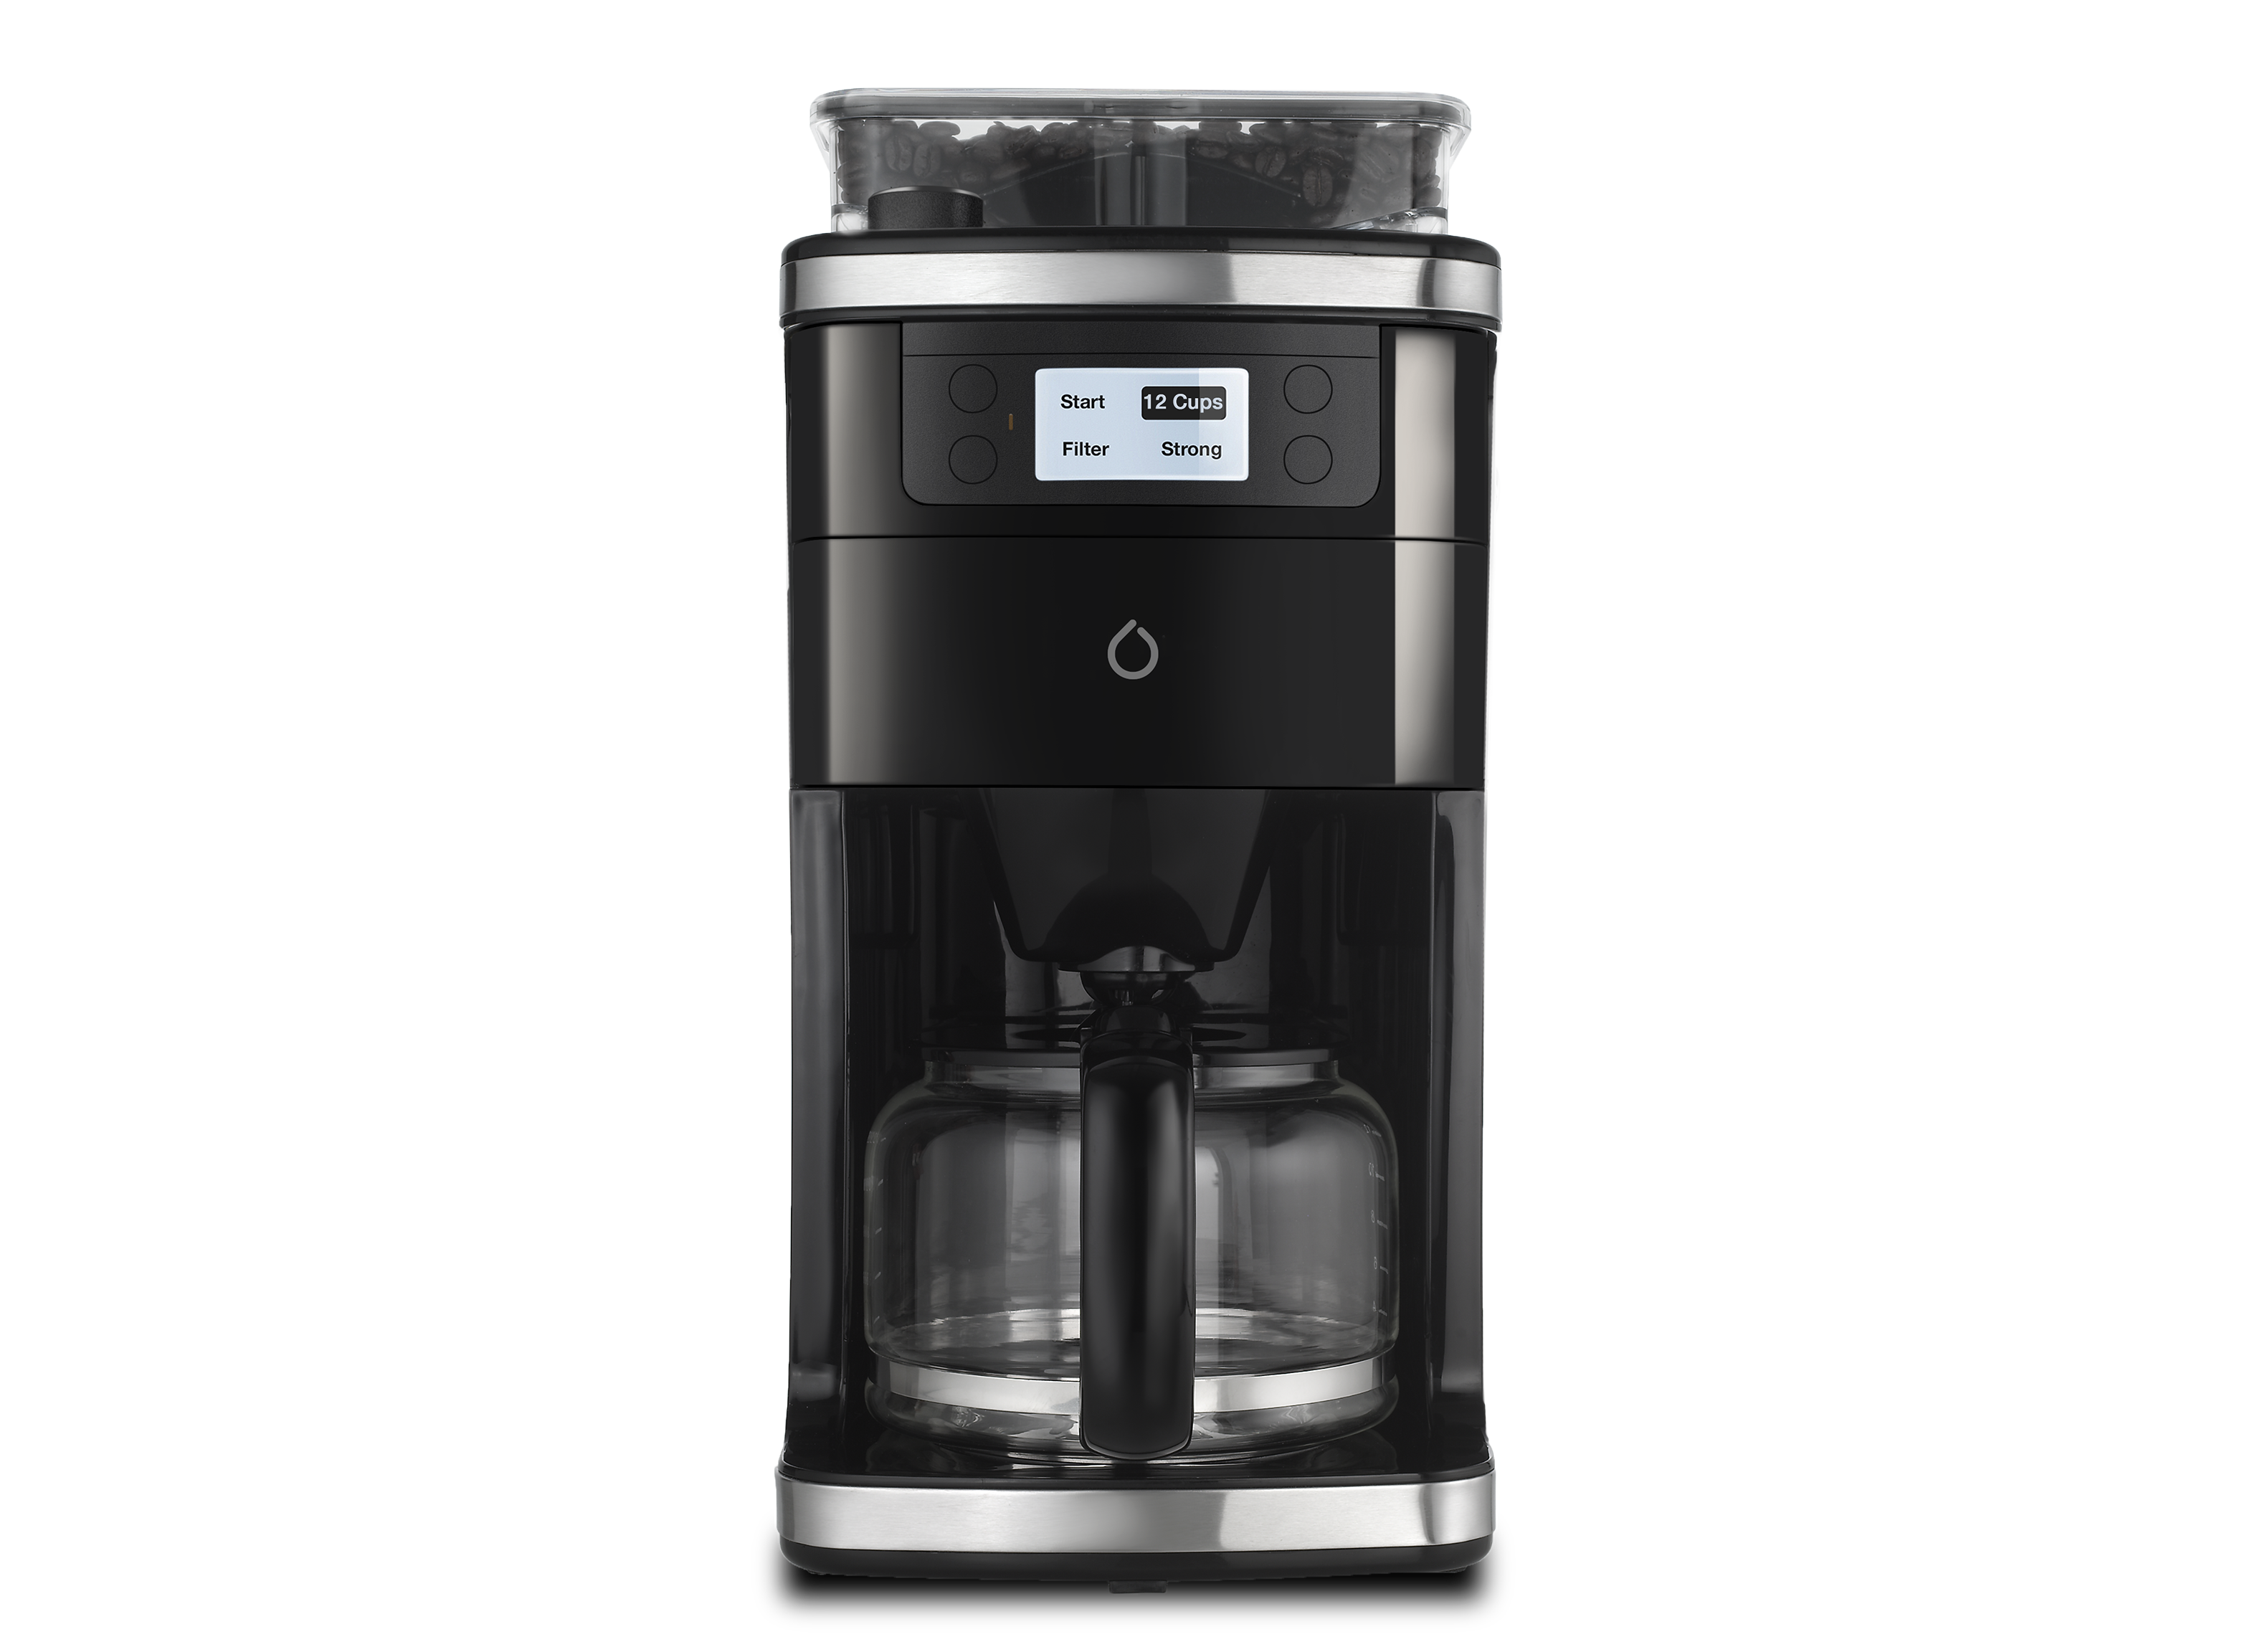 https://crdms.images.consumerreports.org/prod/products/cr/models/396983-drip-coffee-makers-smarter-2nd-generation-wifi-connected-12-cup-smcof01-10001218.png